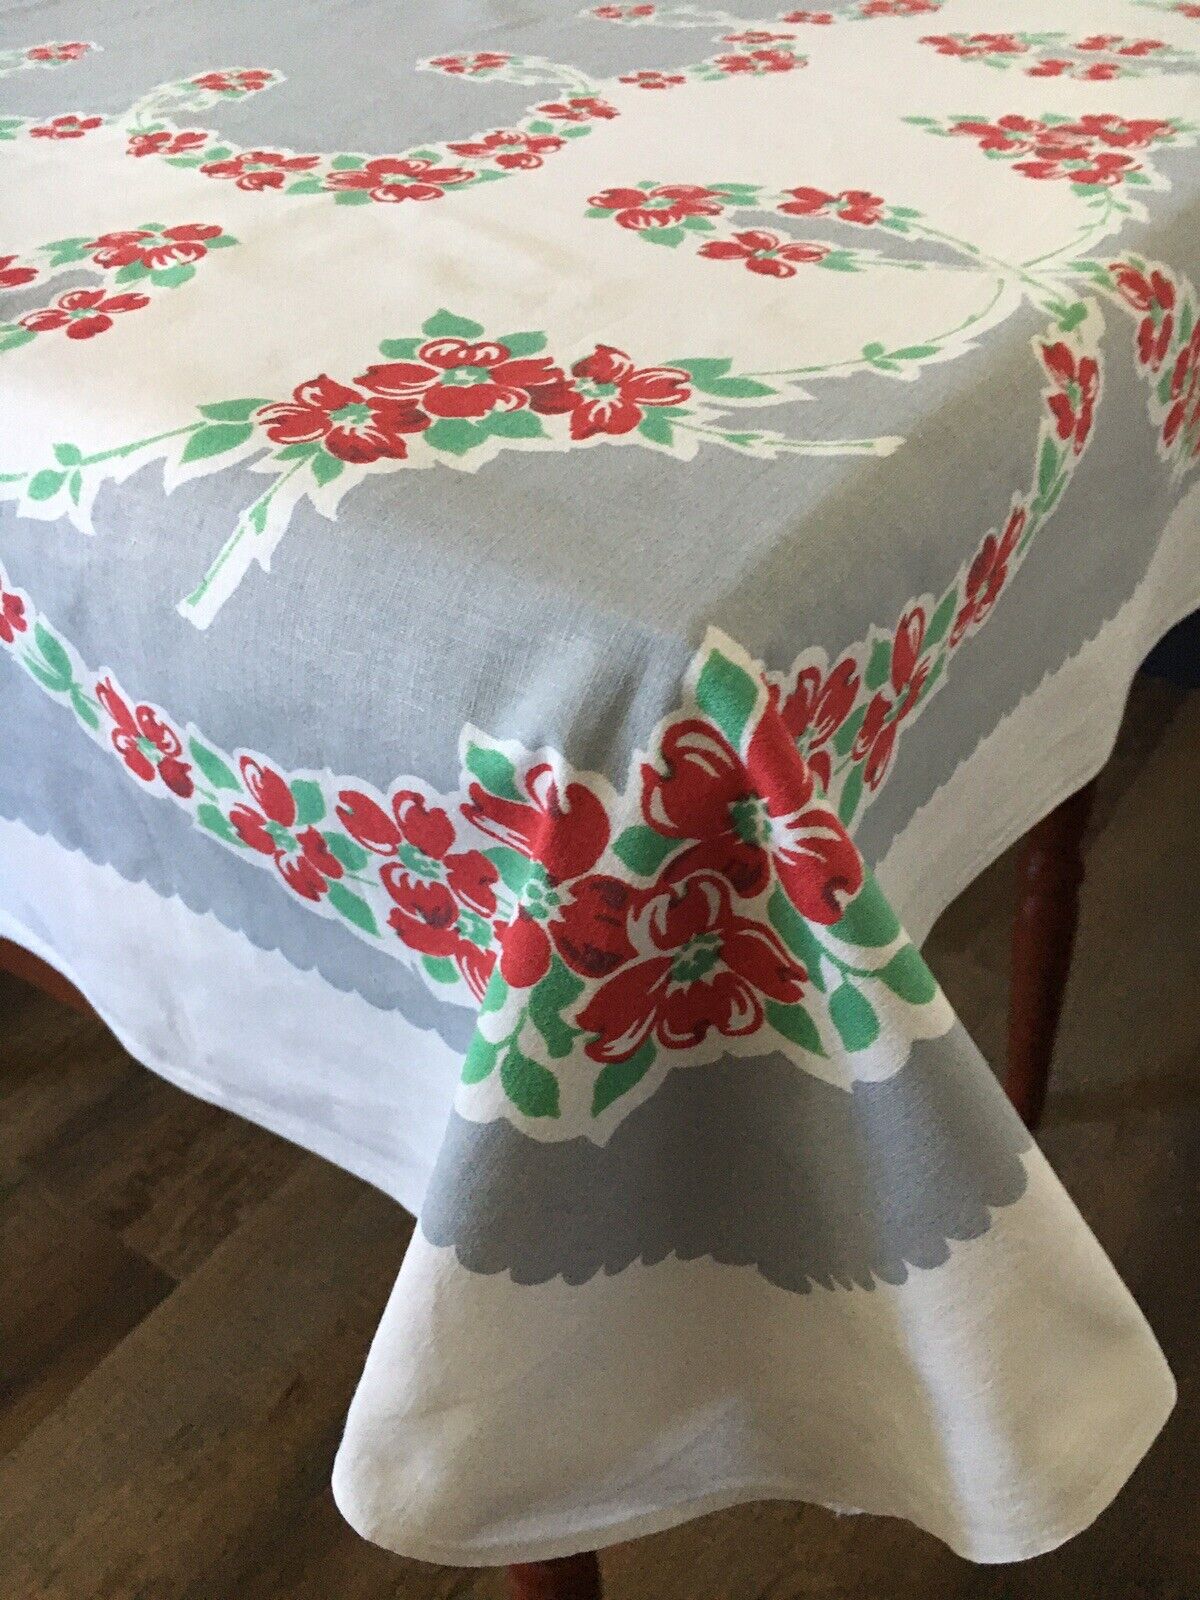 Vintage MCM Printed Tablecloth Excellent Condition Grey Red Green 52x48”